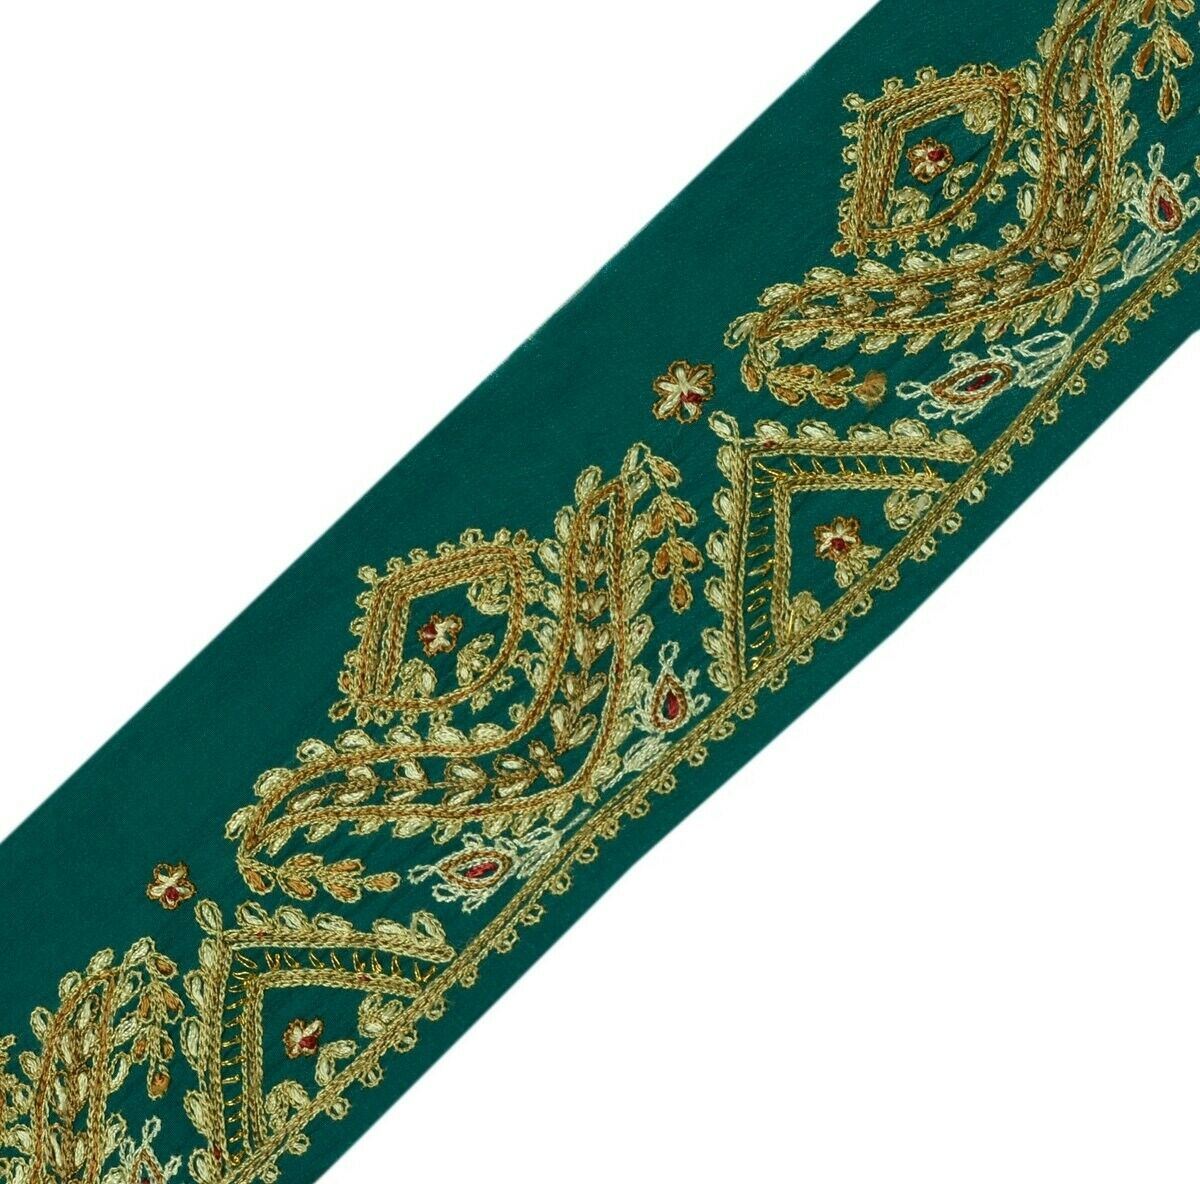 Vintage Saree Border Indian Craft Trim Hand Embroidered Green Sewing Ribbon Lace